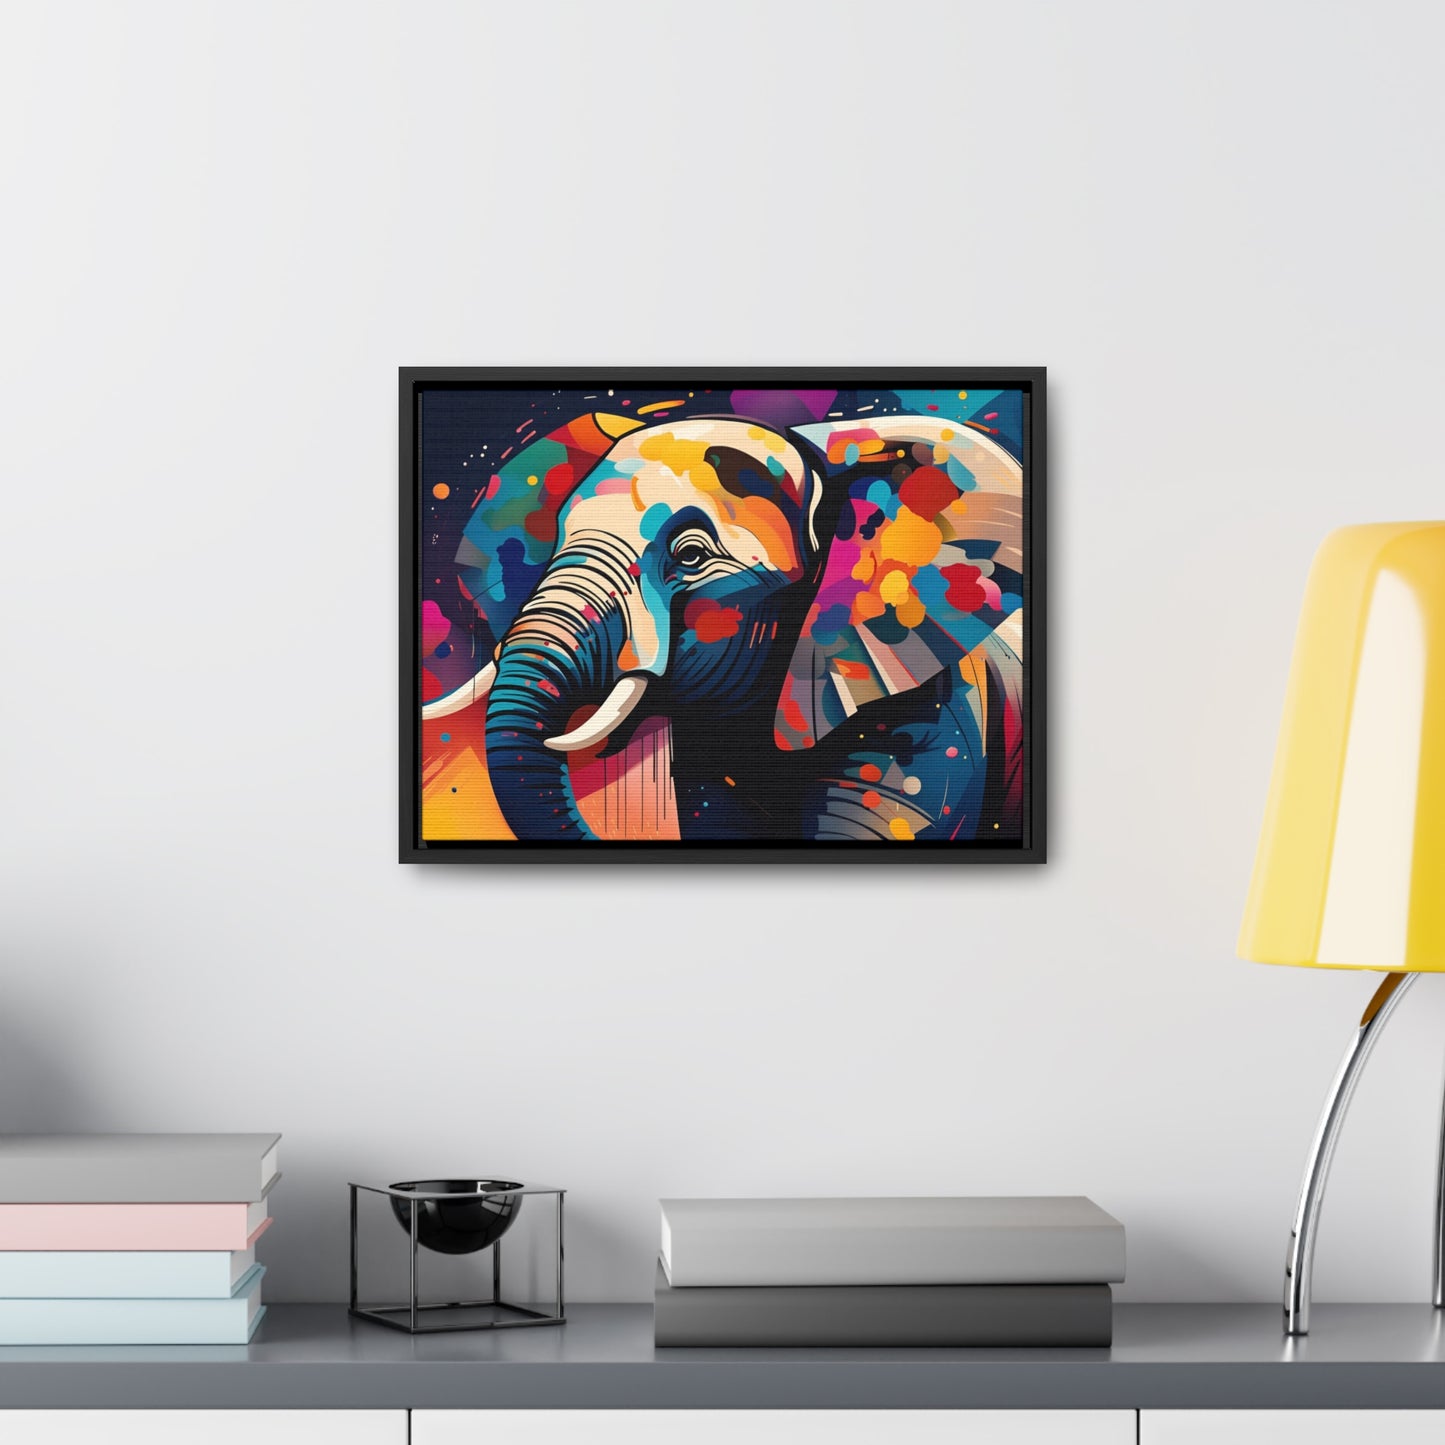 Multicolor Elephant Head Print on Canvas in a Floating Frame 16x12hung on light wall